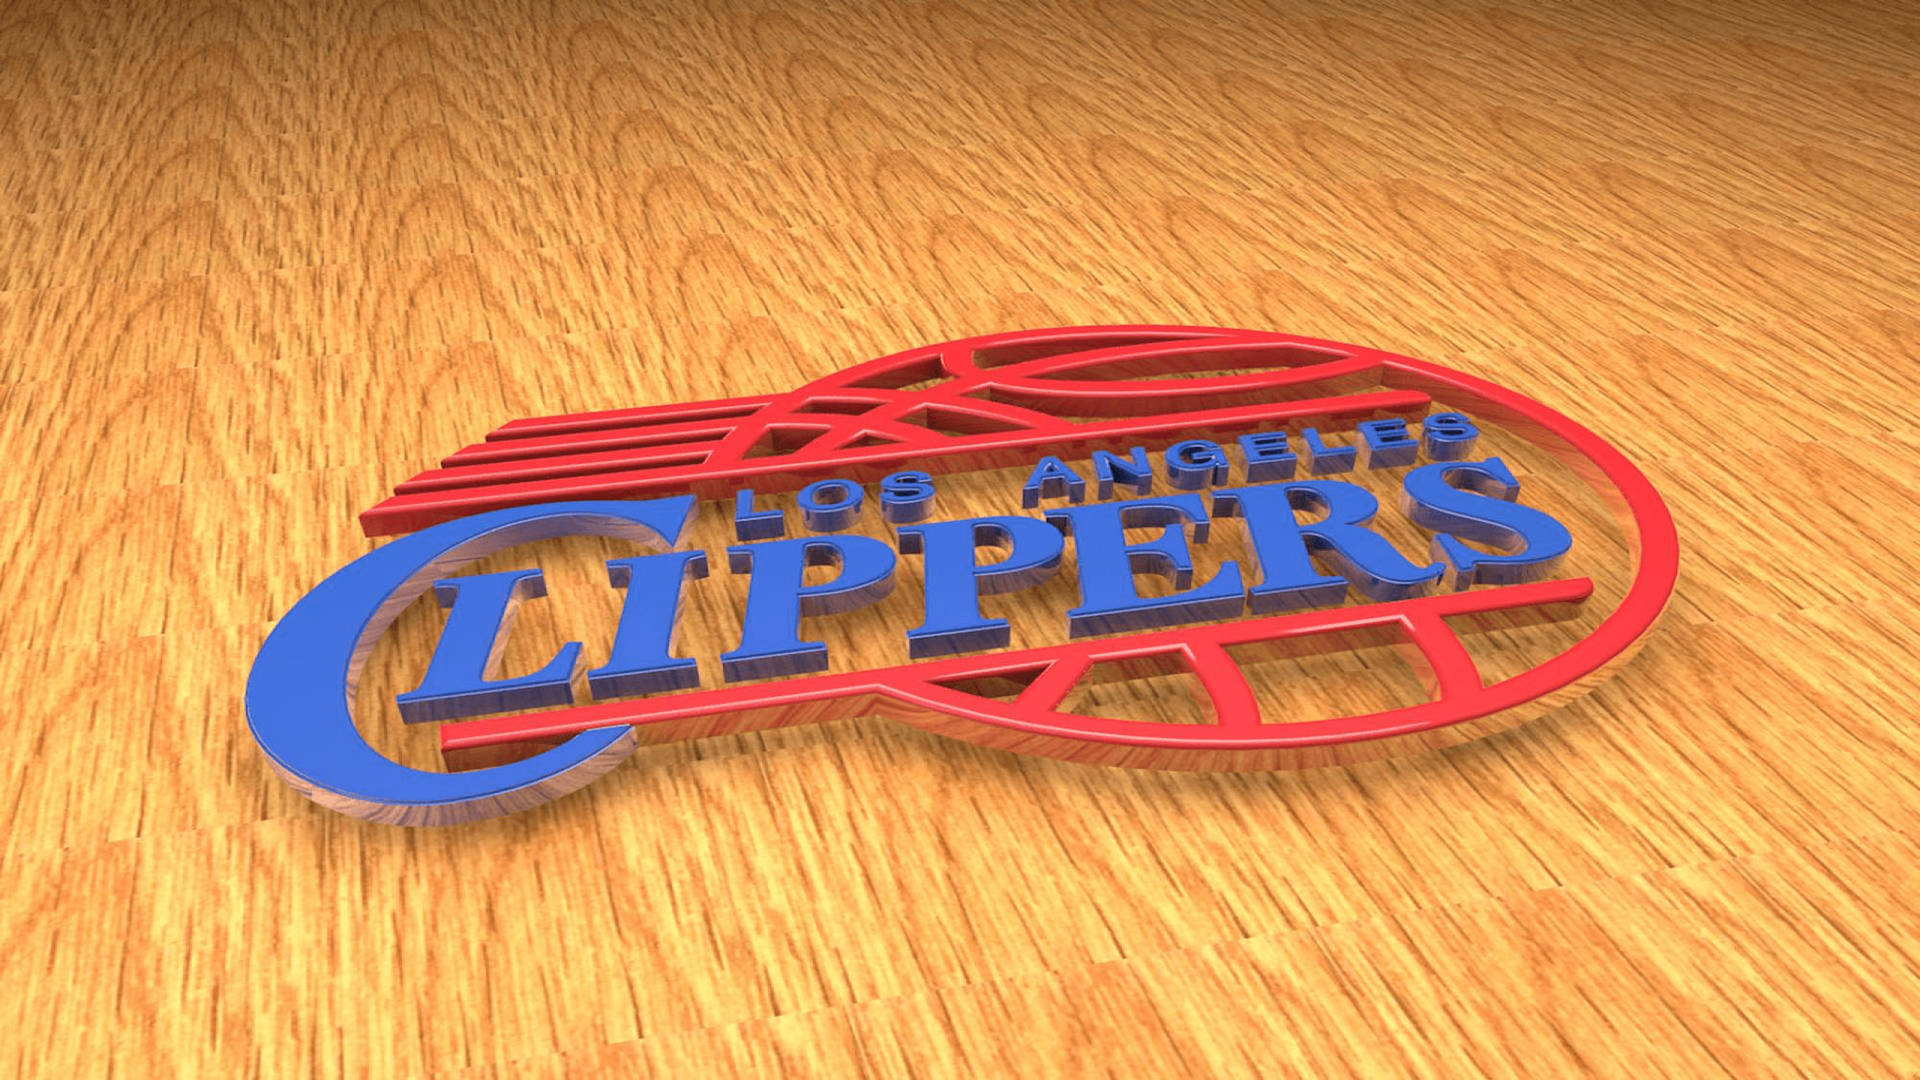 Los Angeles Clippers 3d 1984 Logotyp Wallpaper